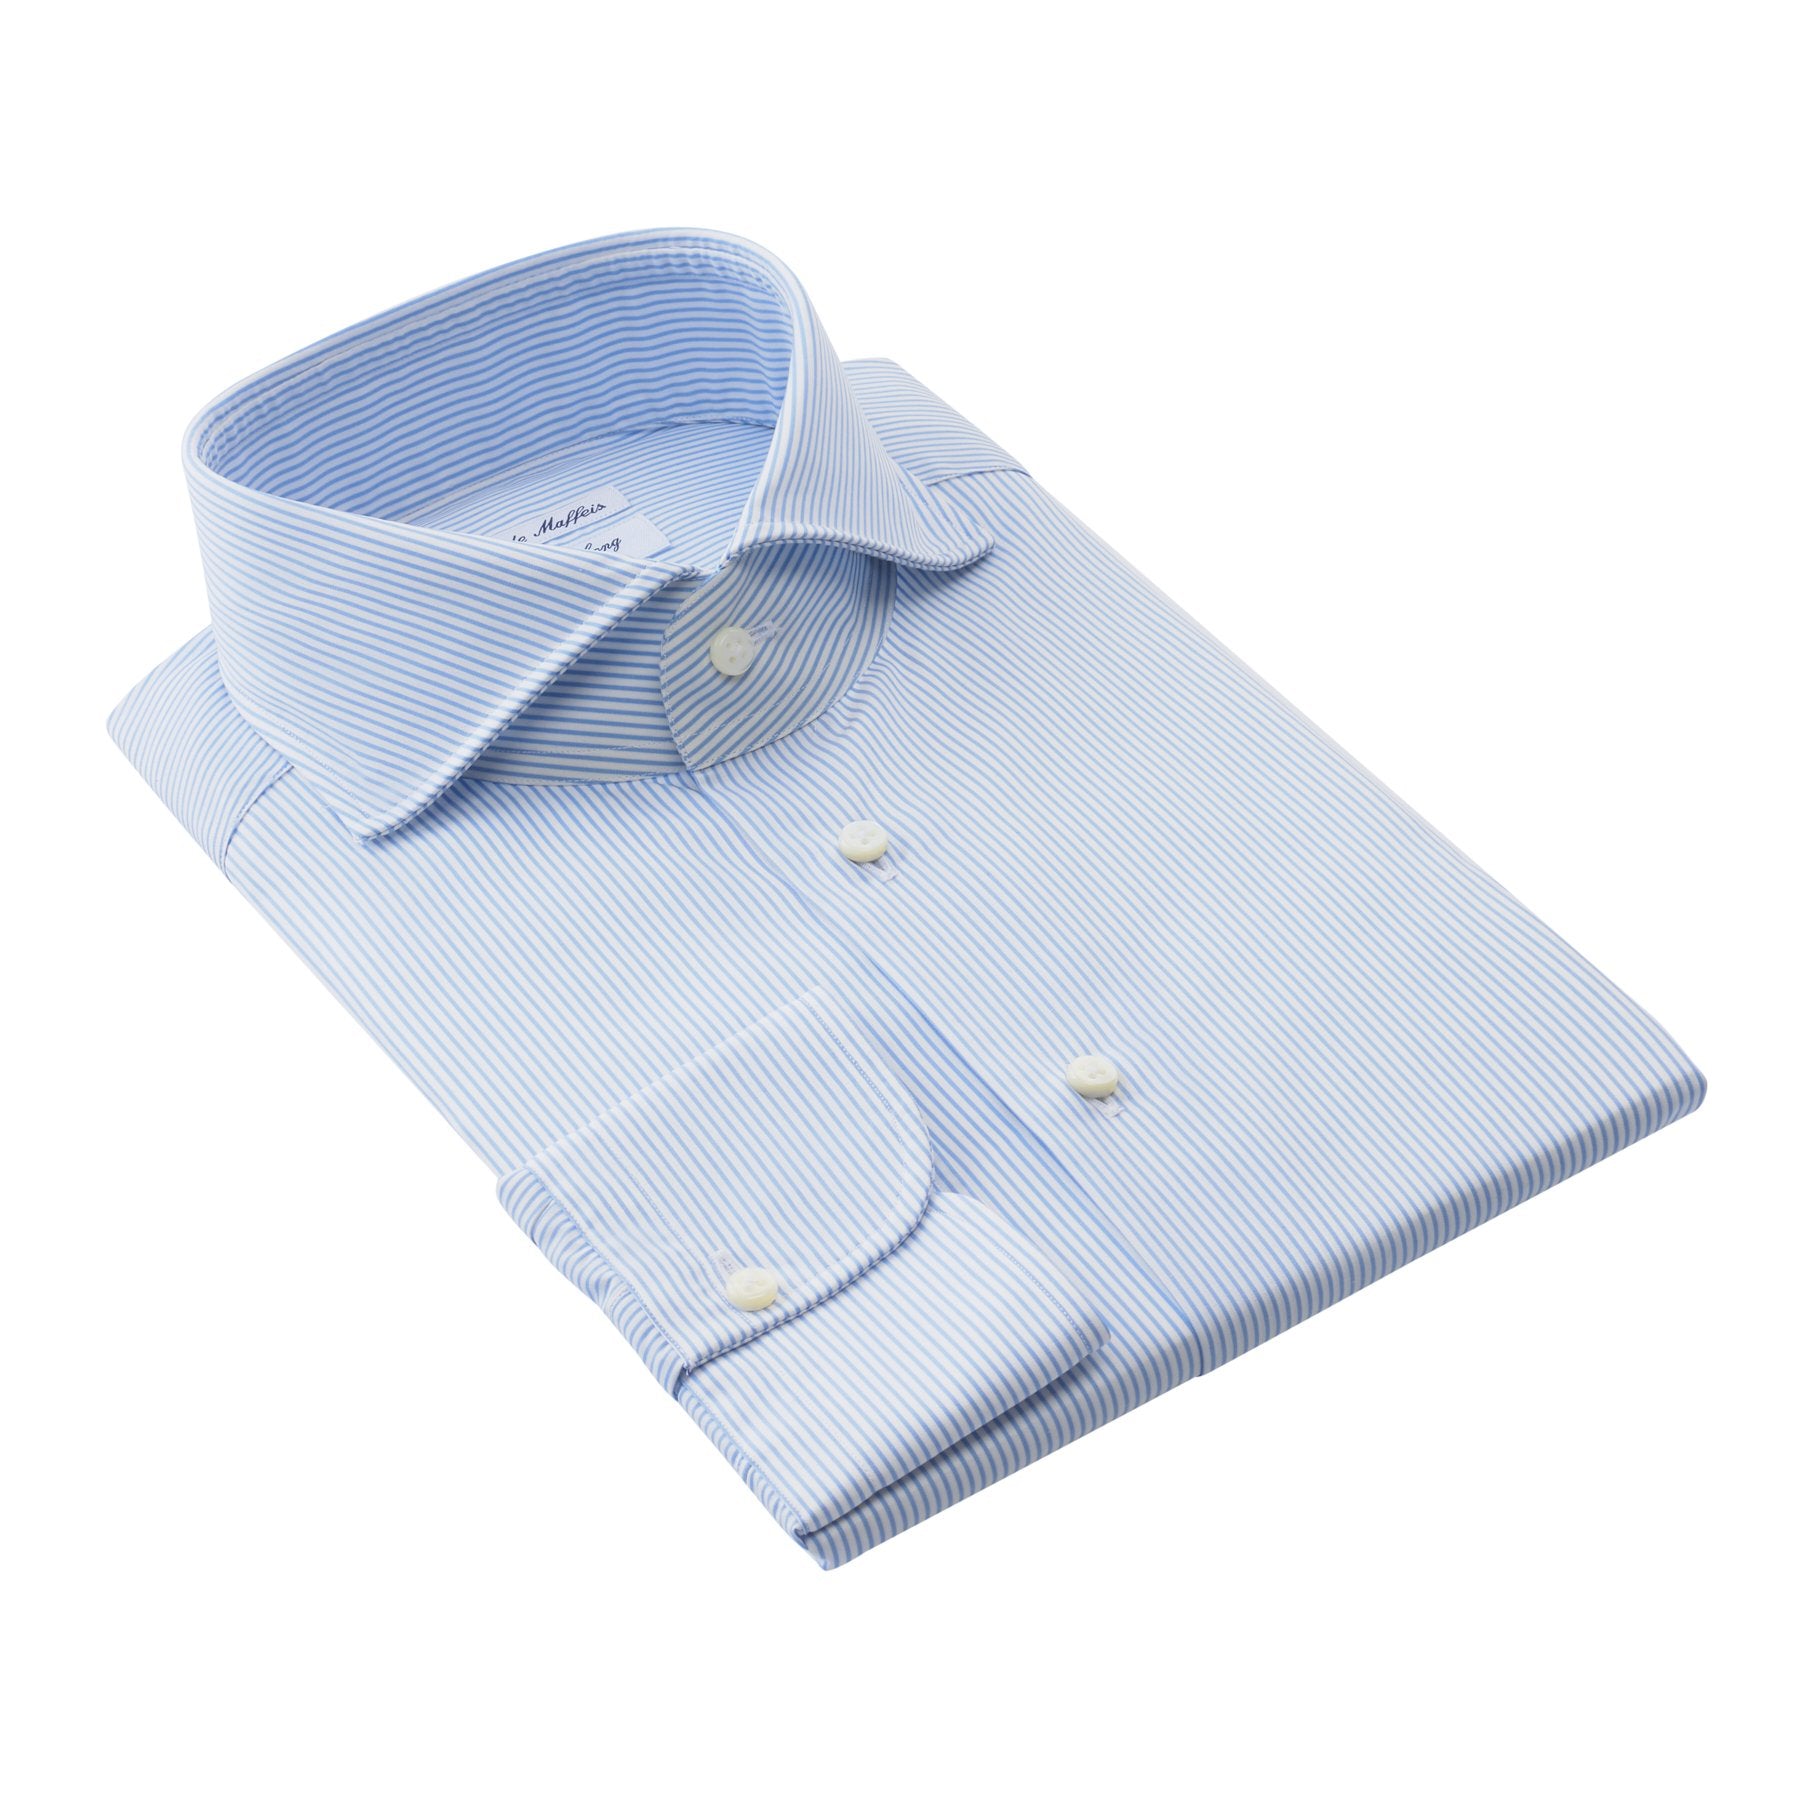 "All Day Long Collection" Striped Cotton Light Blue Shirt with Shark Collar